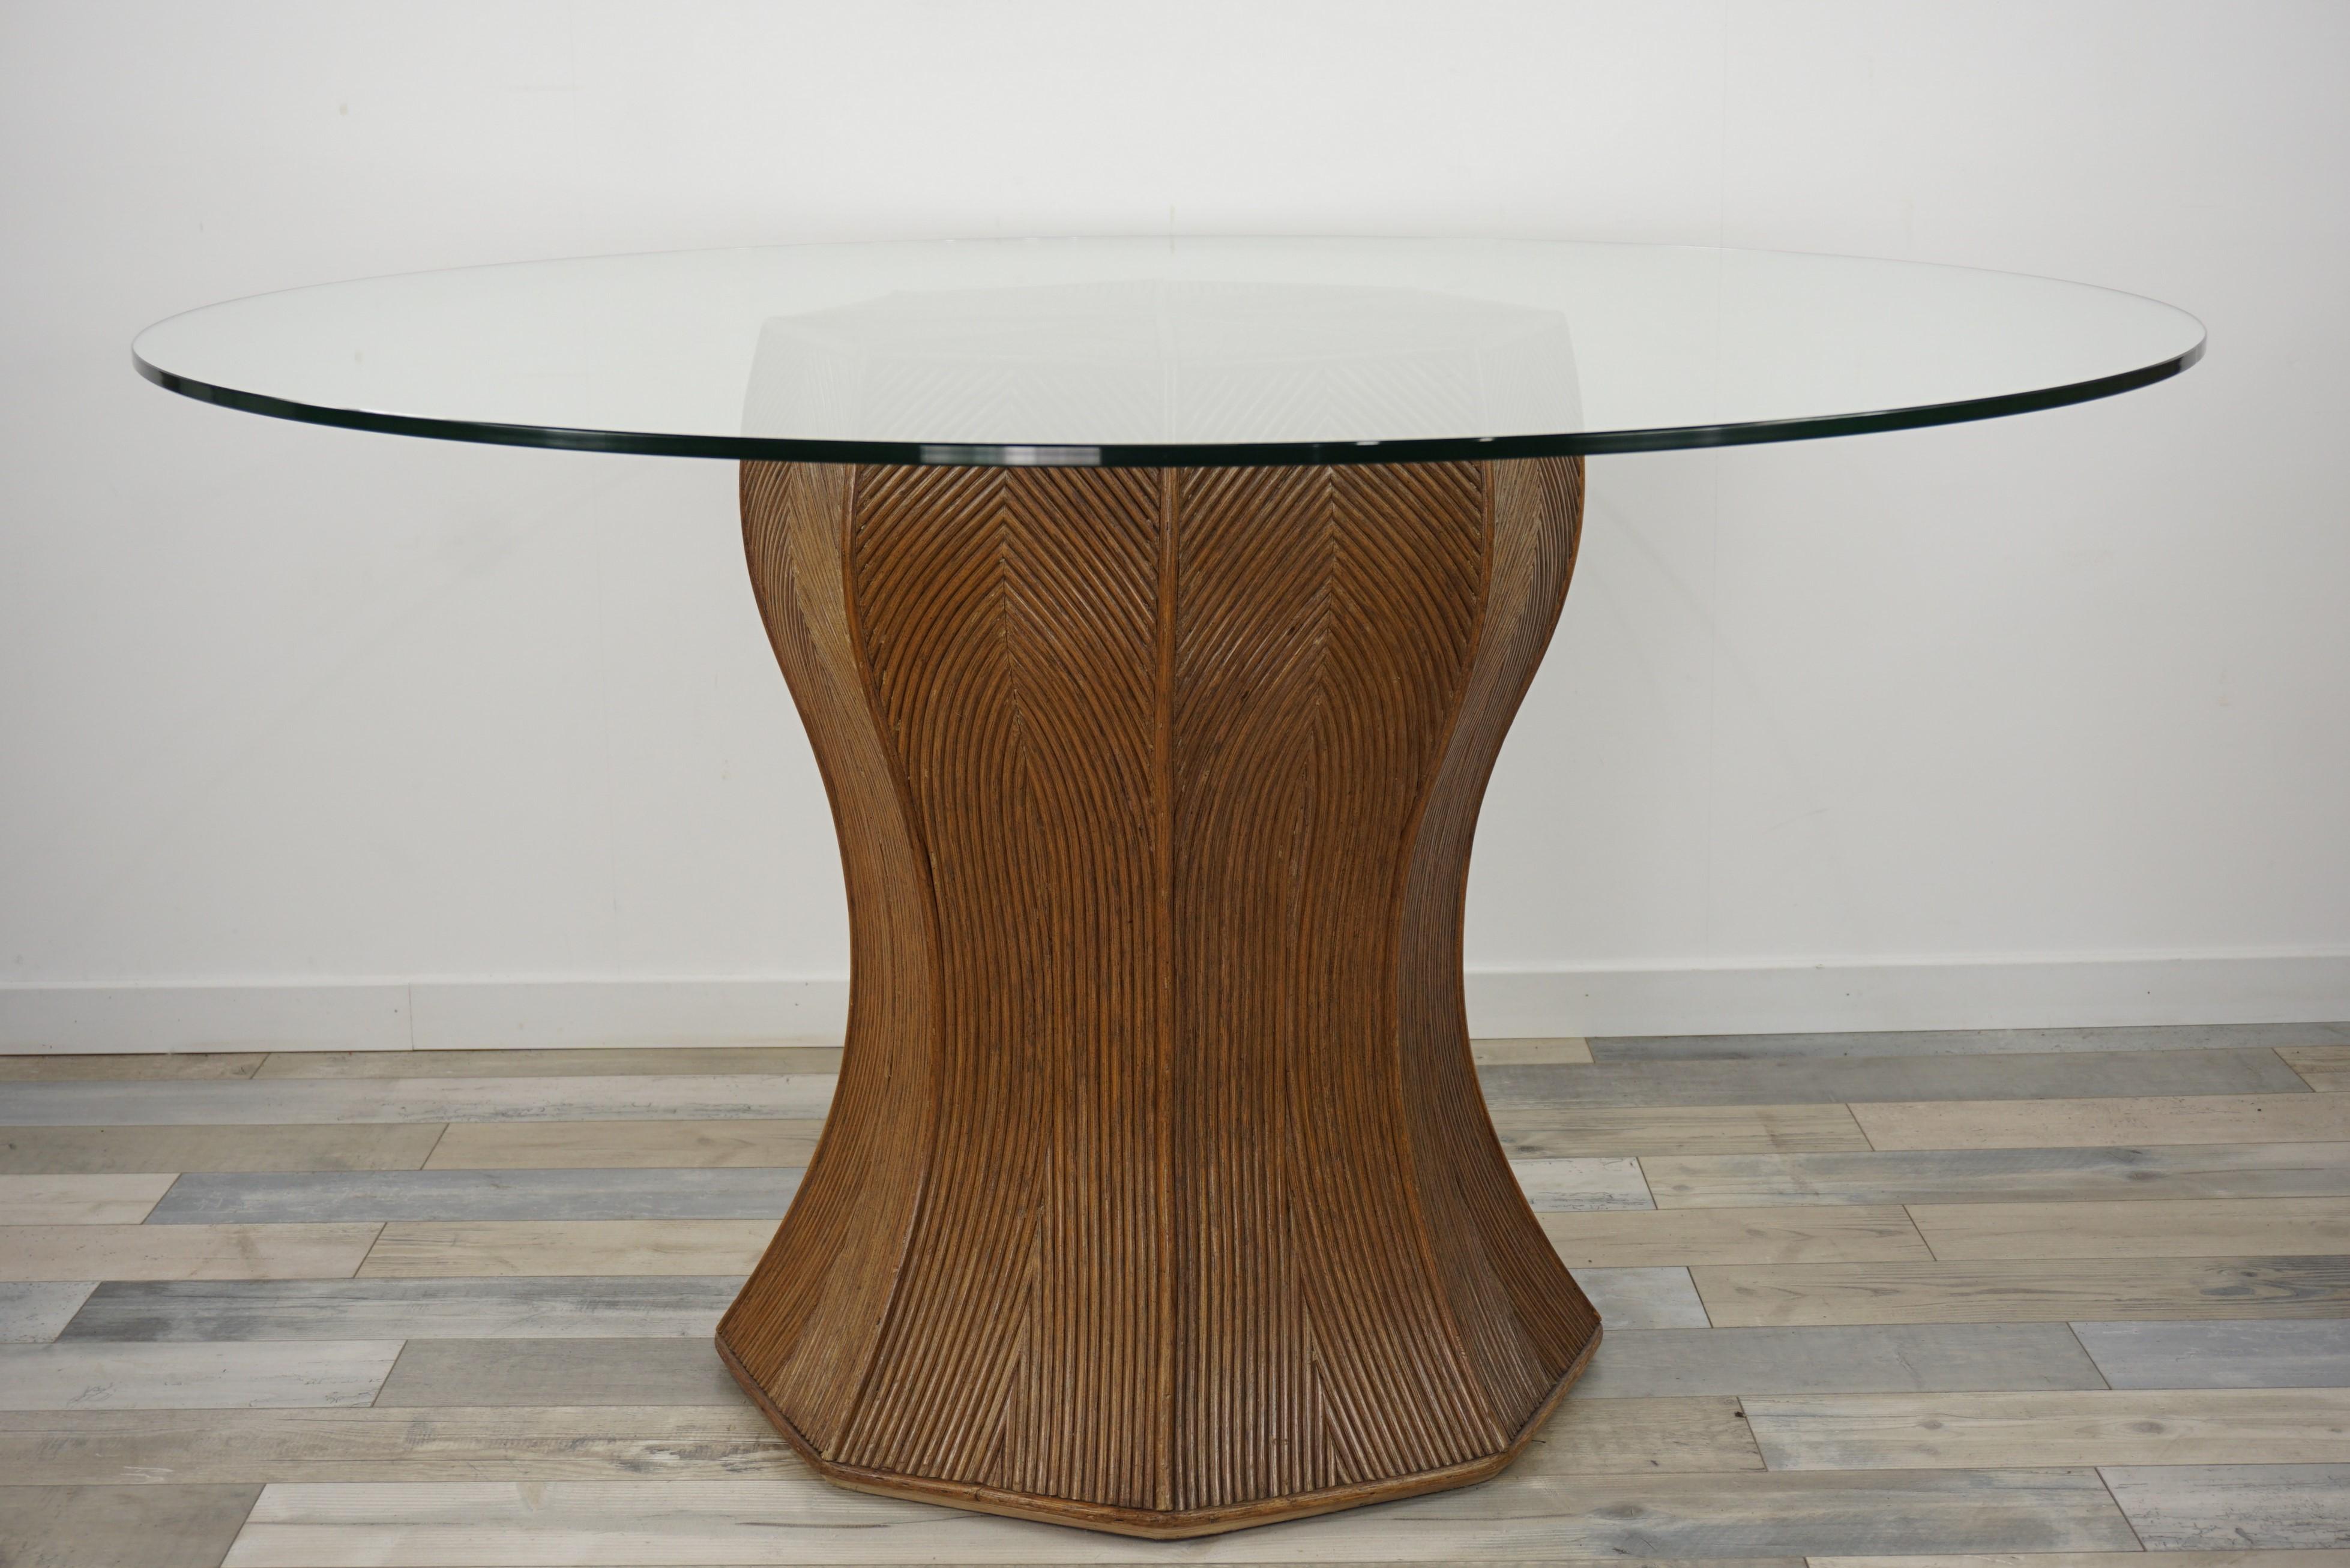 European Italian Design Pencil Reed or Rattan Marquetry and Glass Pedestal Dining Table For Sale